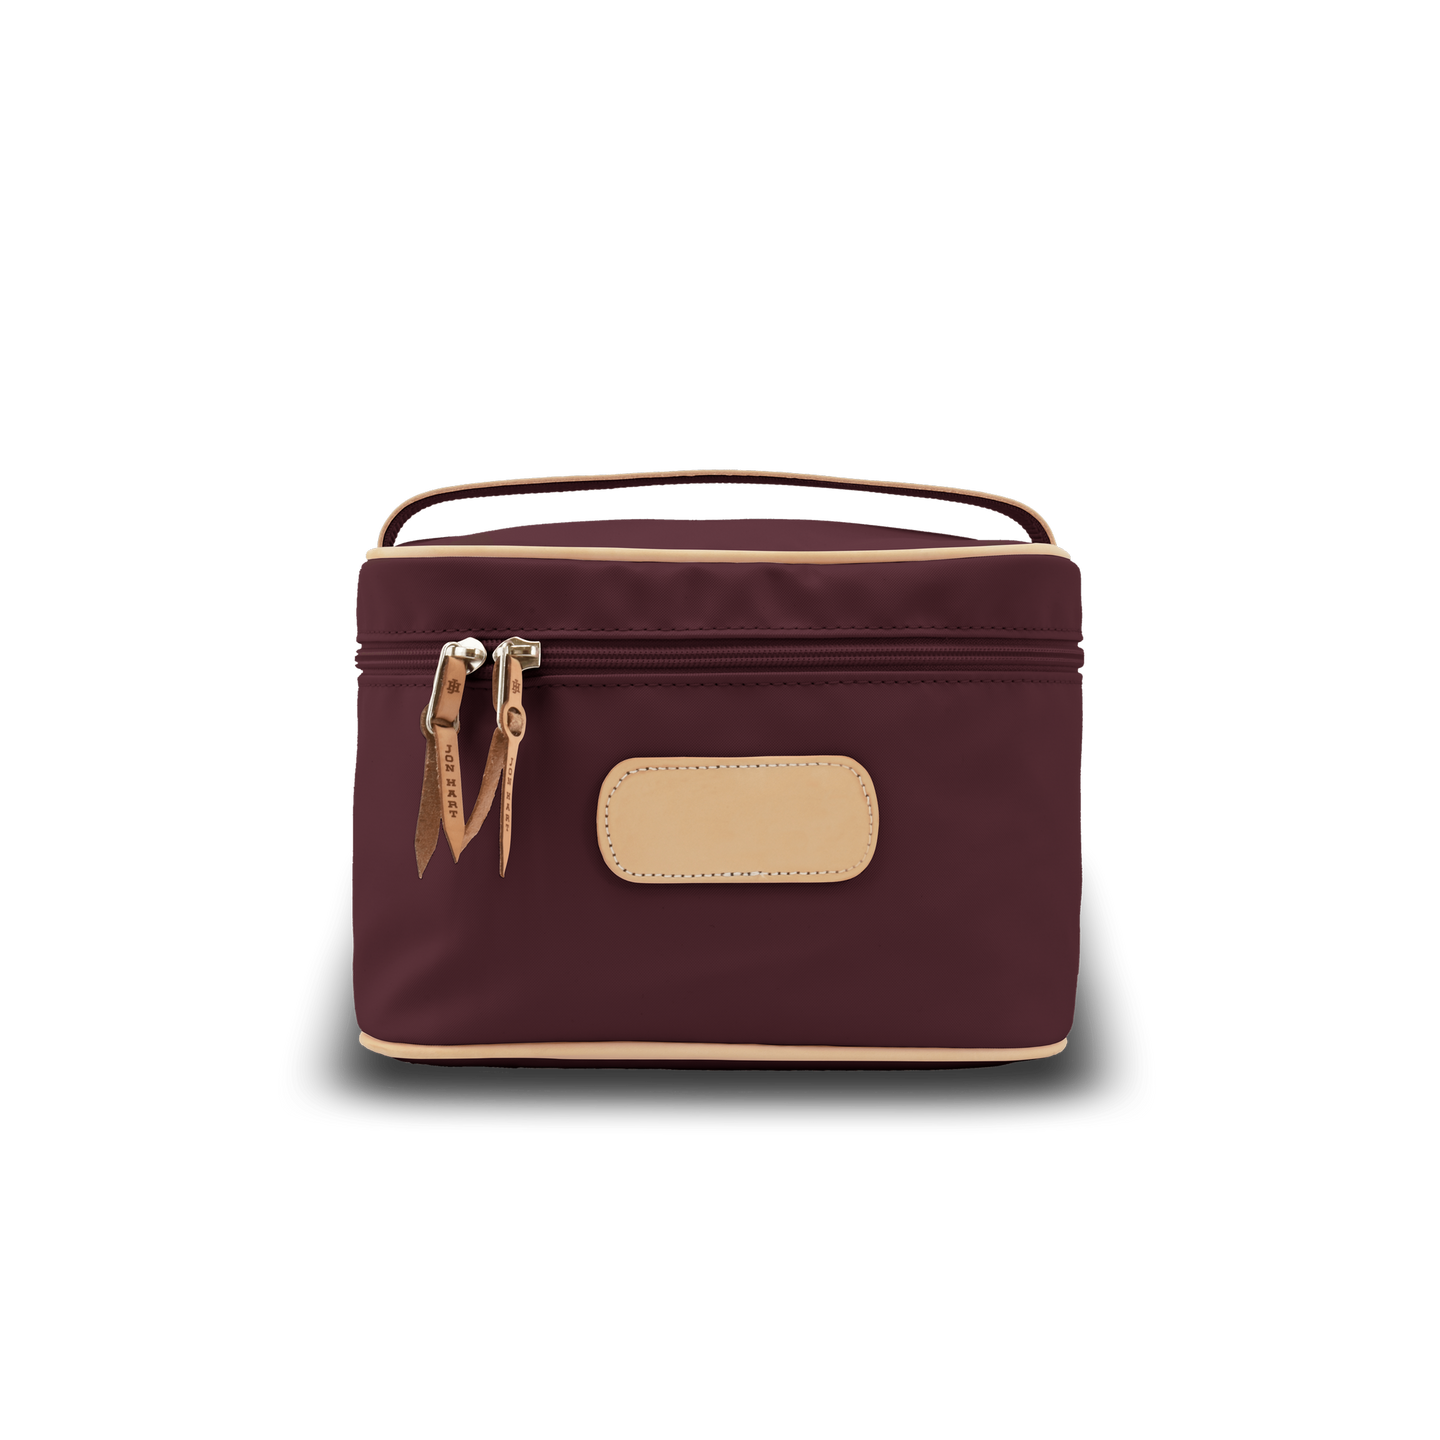 Makeup Case - Burgundy Coated Canvas Front Angle in Color 'Burgundy Coated Canvas'